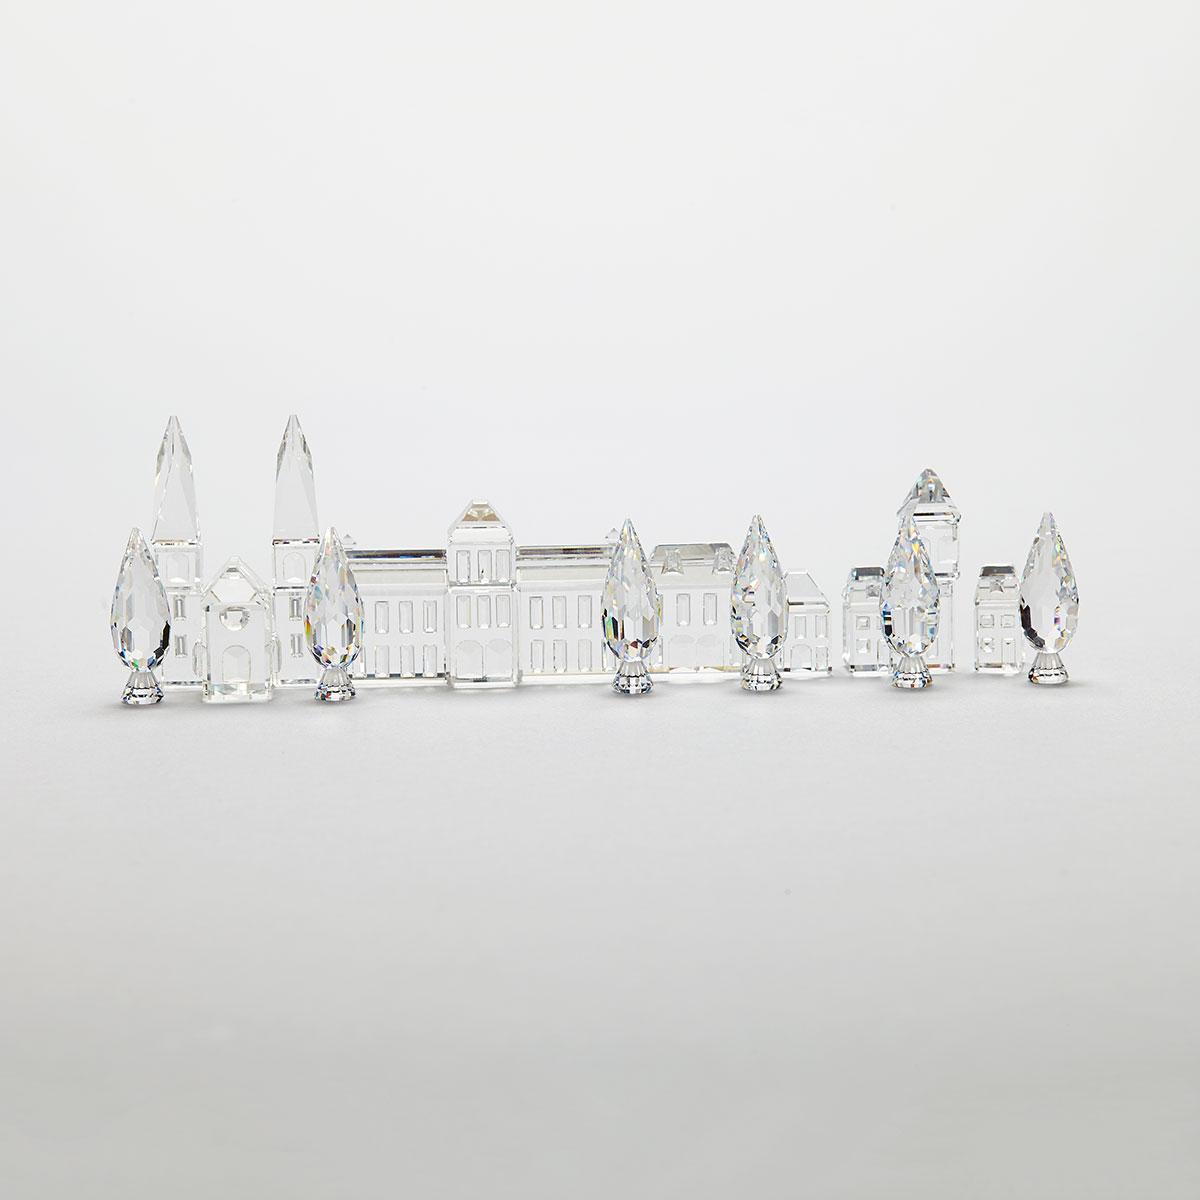 Swarovski Crystal Buildings and Trees, late 20th/early 21st century